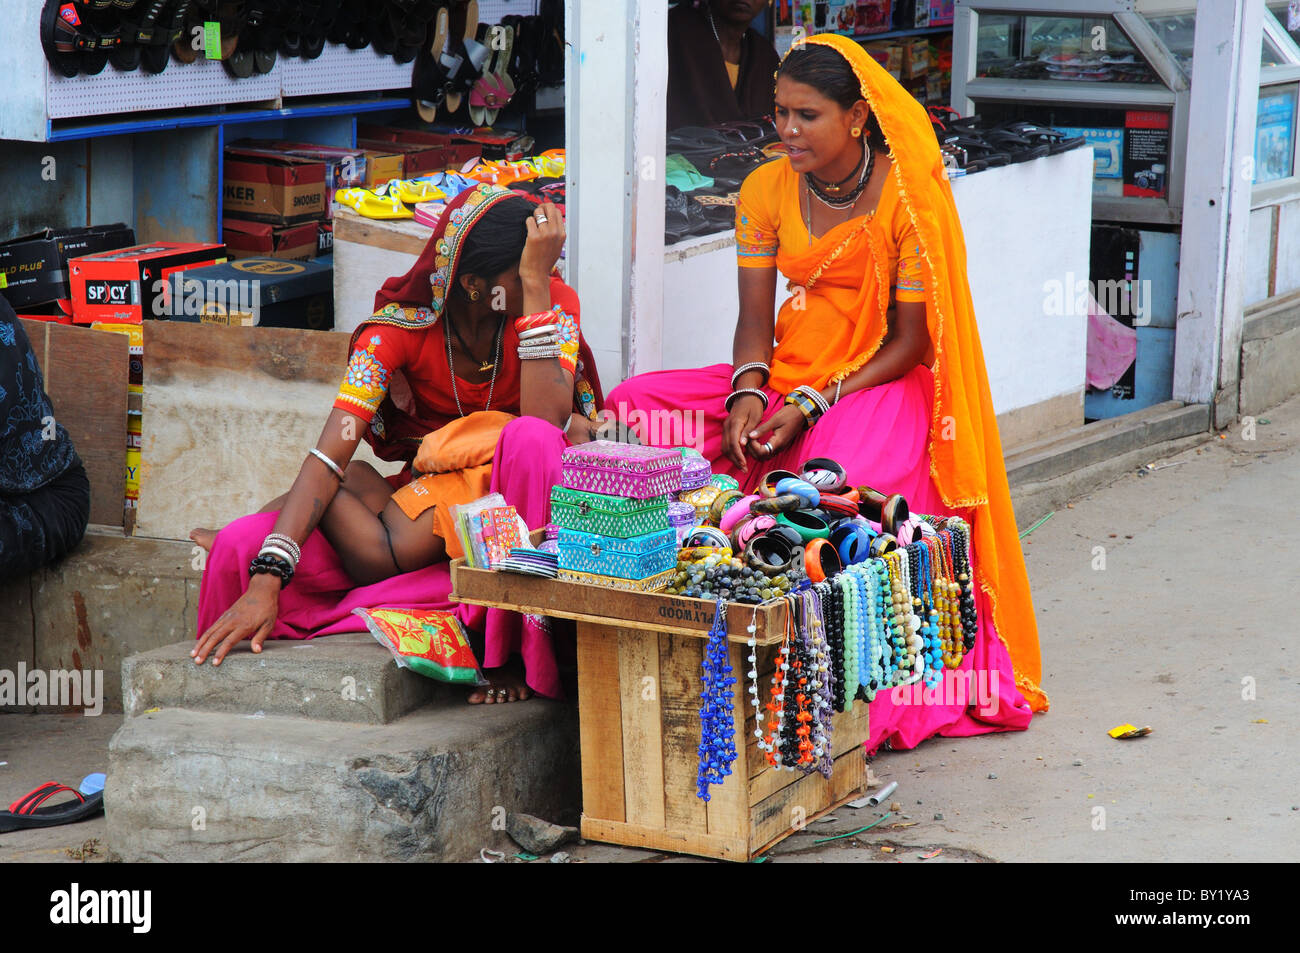 Two women and their jewellery stall in India Stock Photo